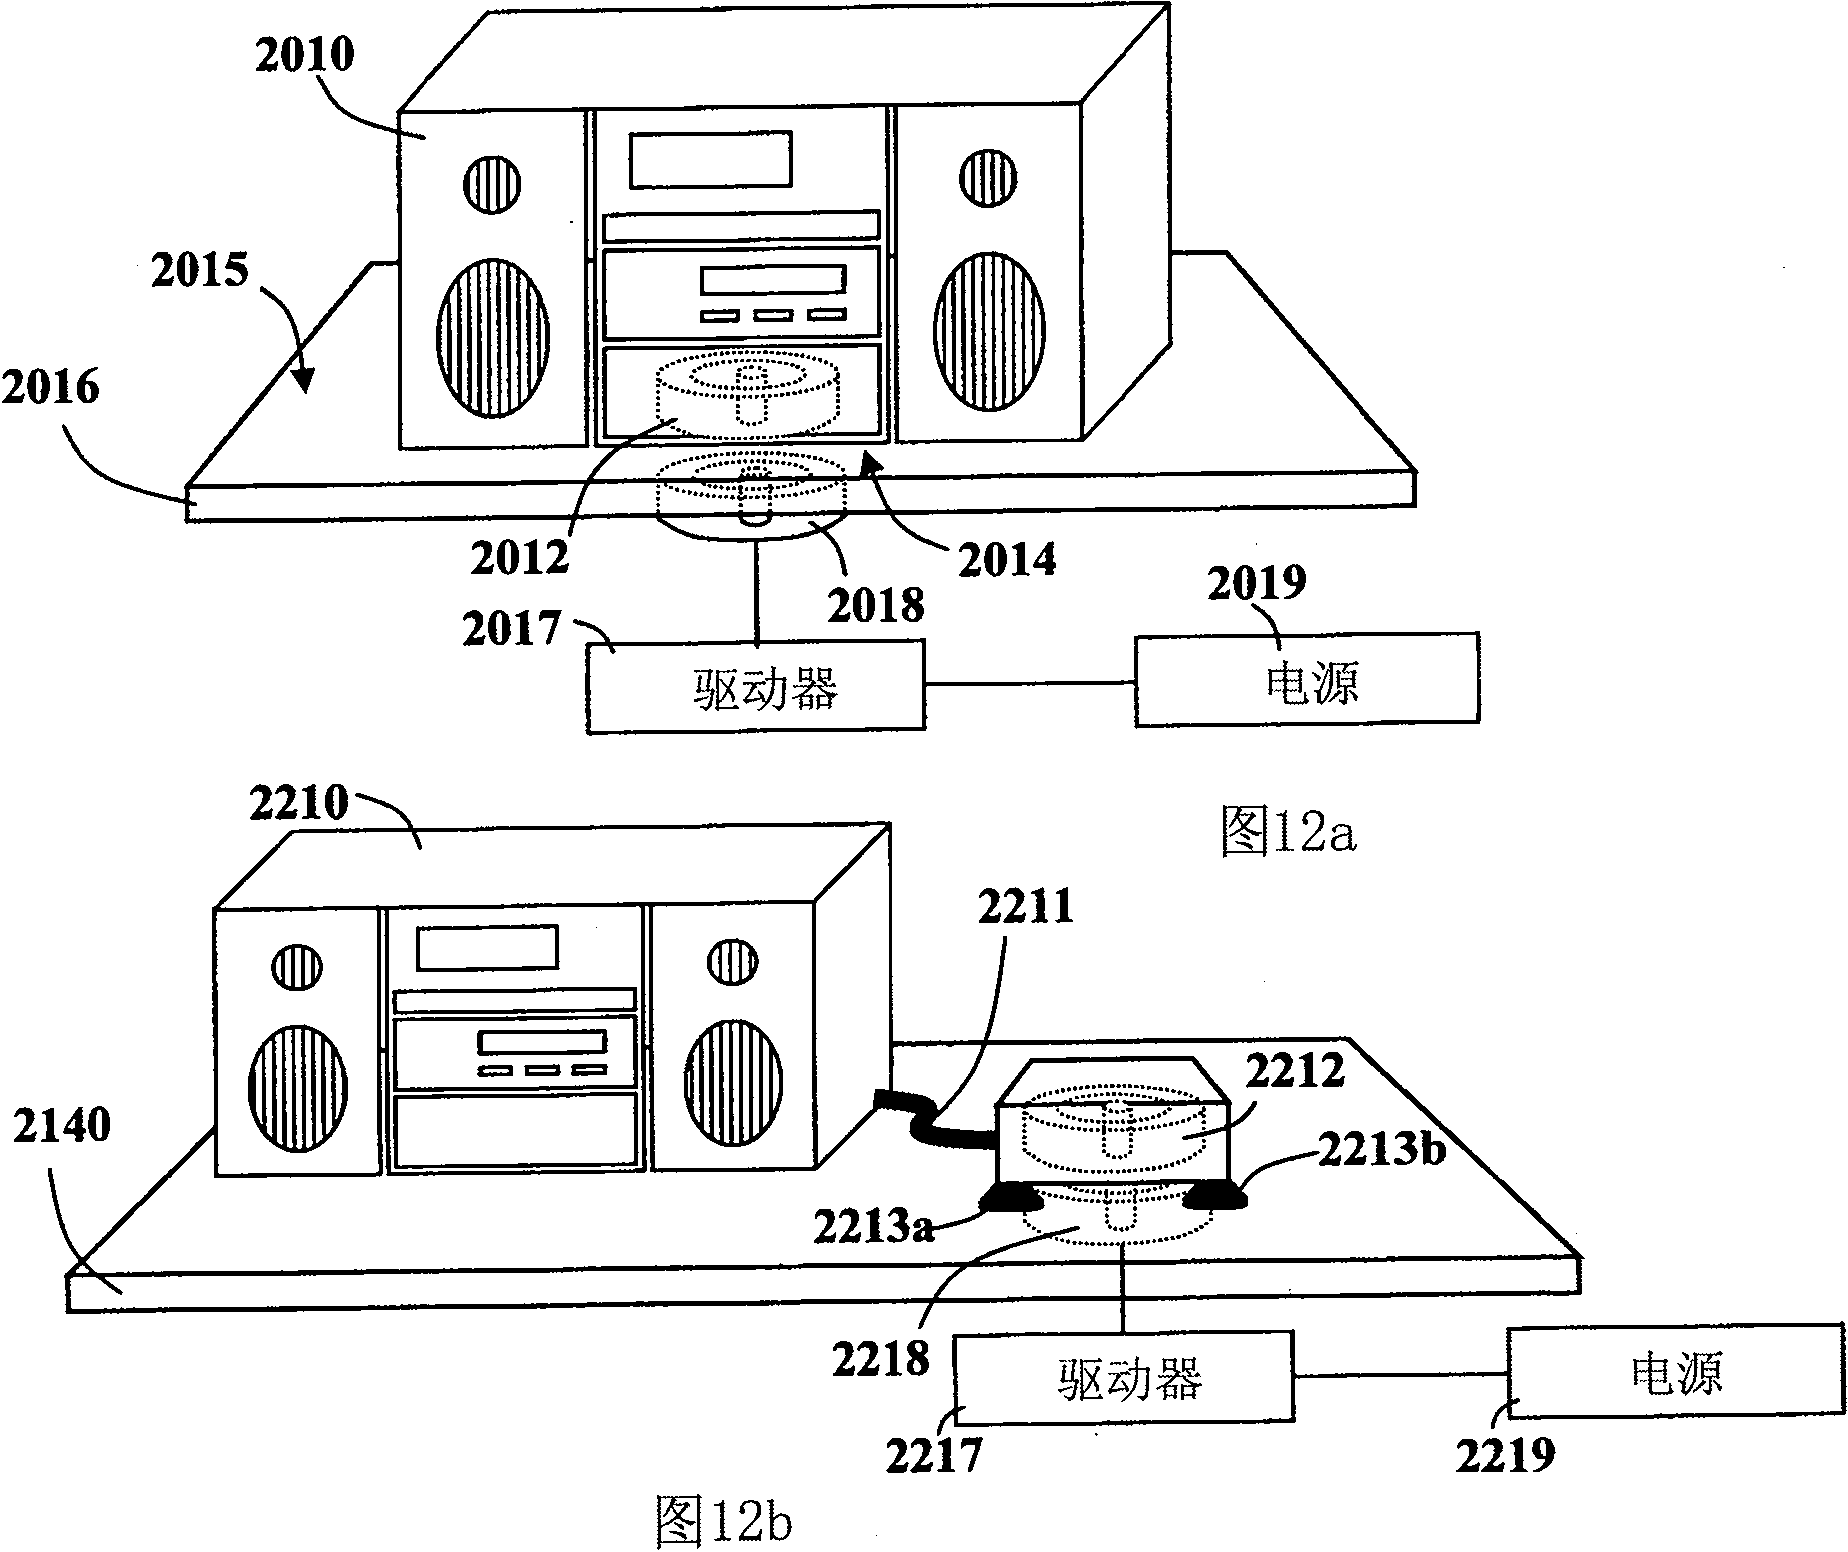 Inductive power providing system